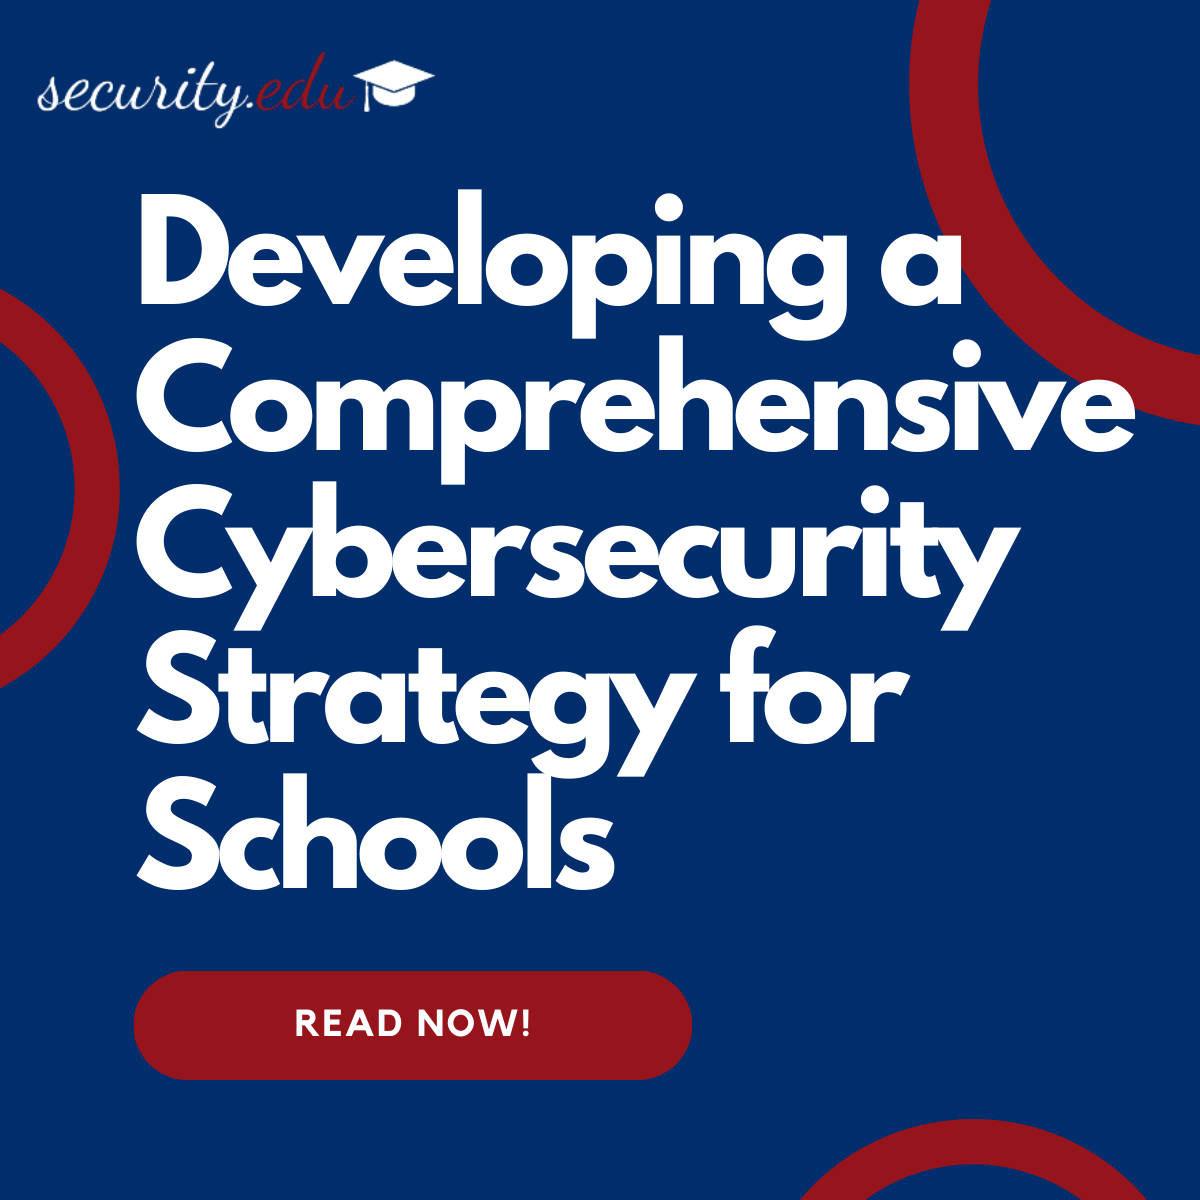 Developing a Comprehensive Cybersecurity Strategy for Schools